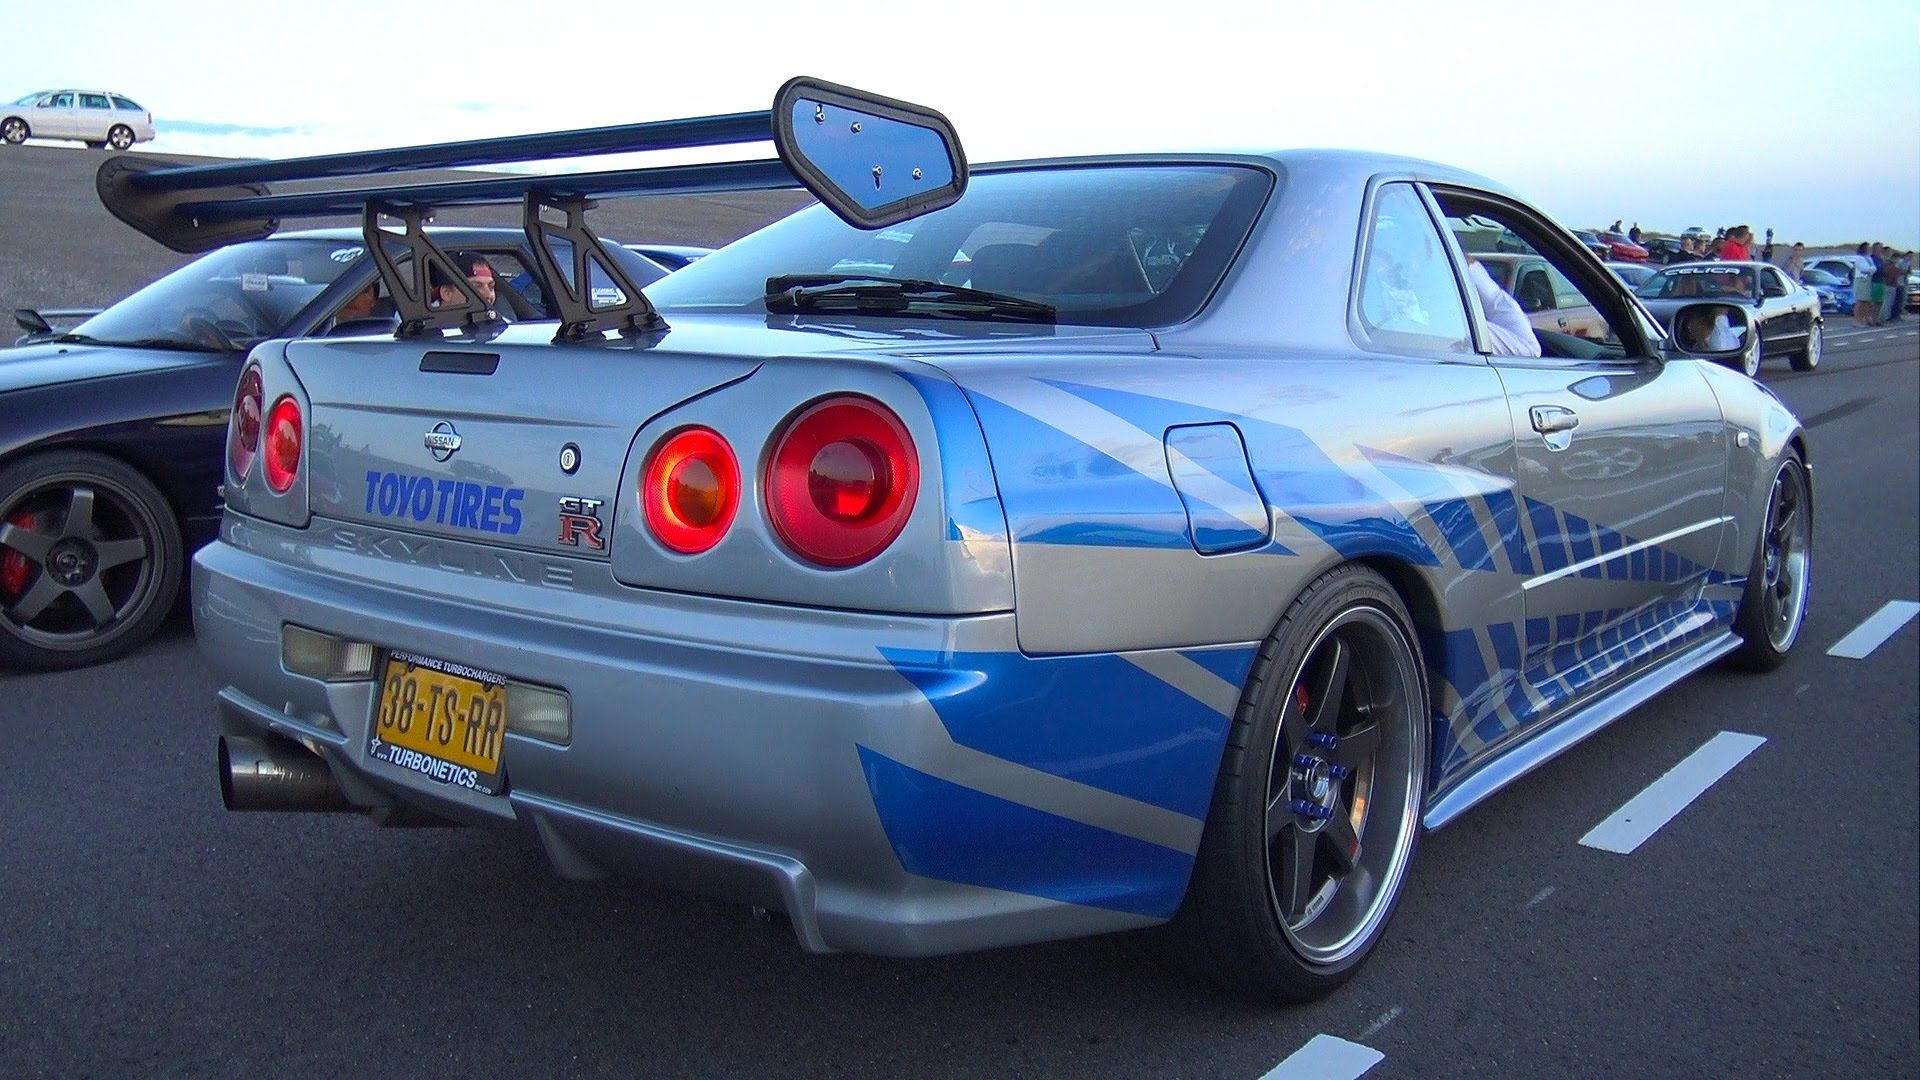 Fast and Furious Skyline, Nissan GT-R, Burnout, Accelerations, 1920x1080 Full HD Desktop